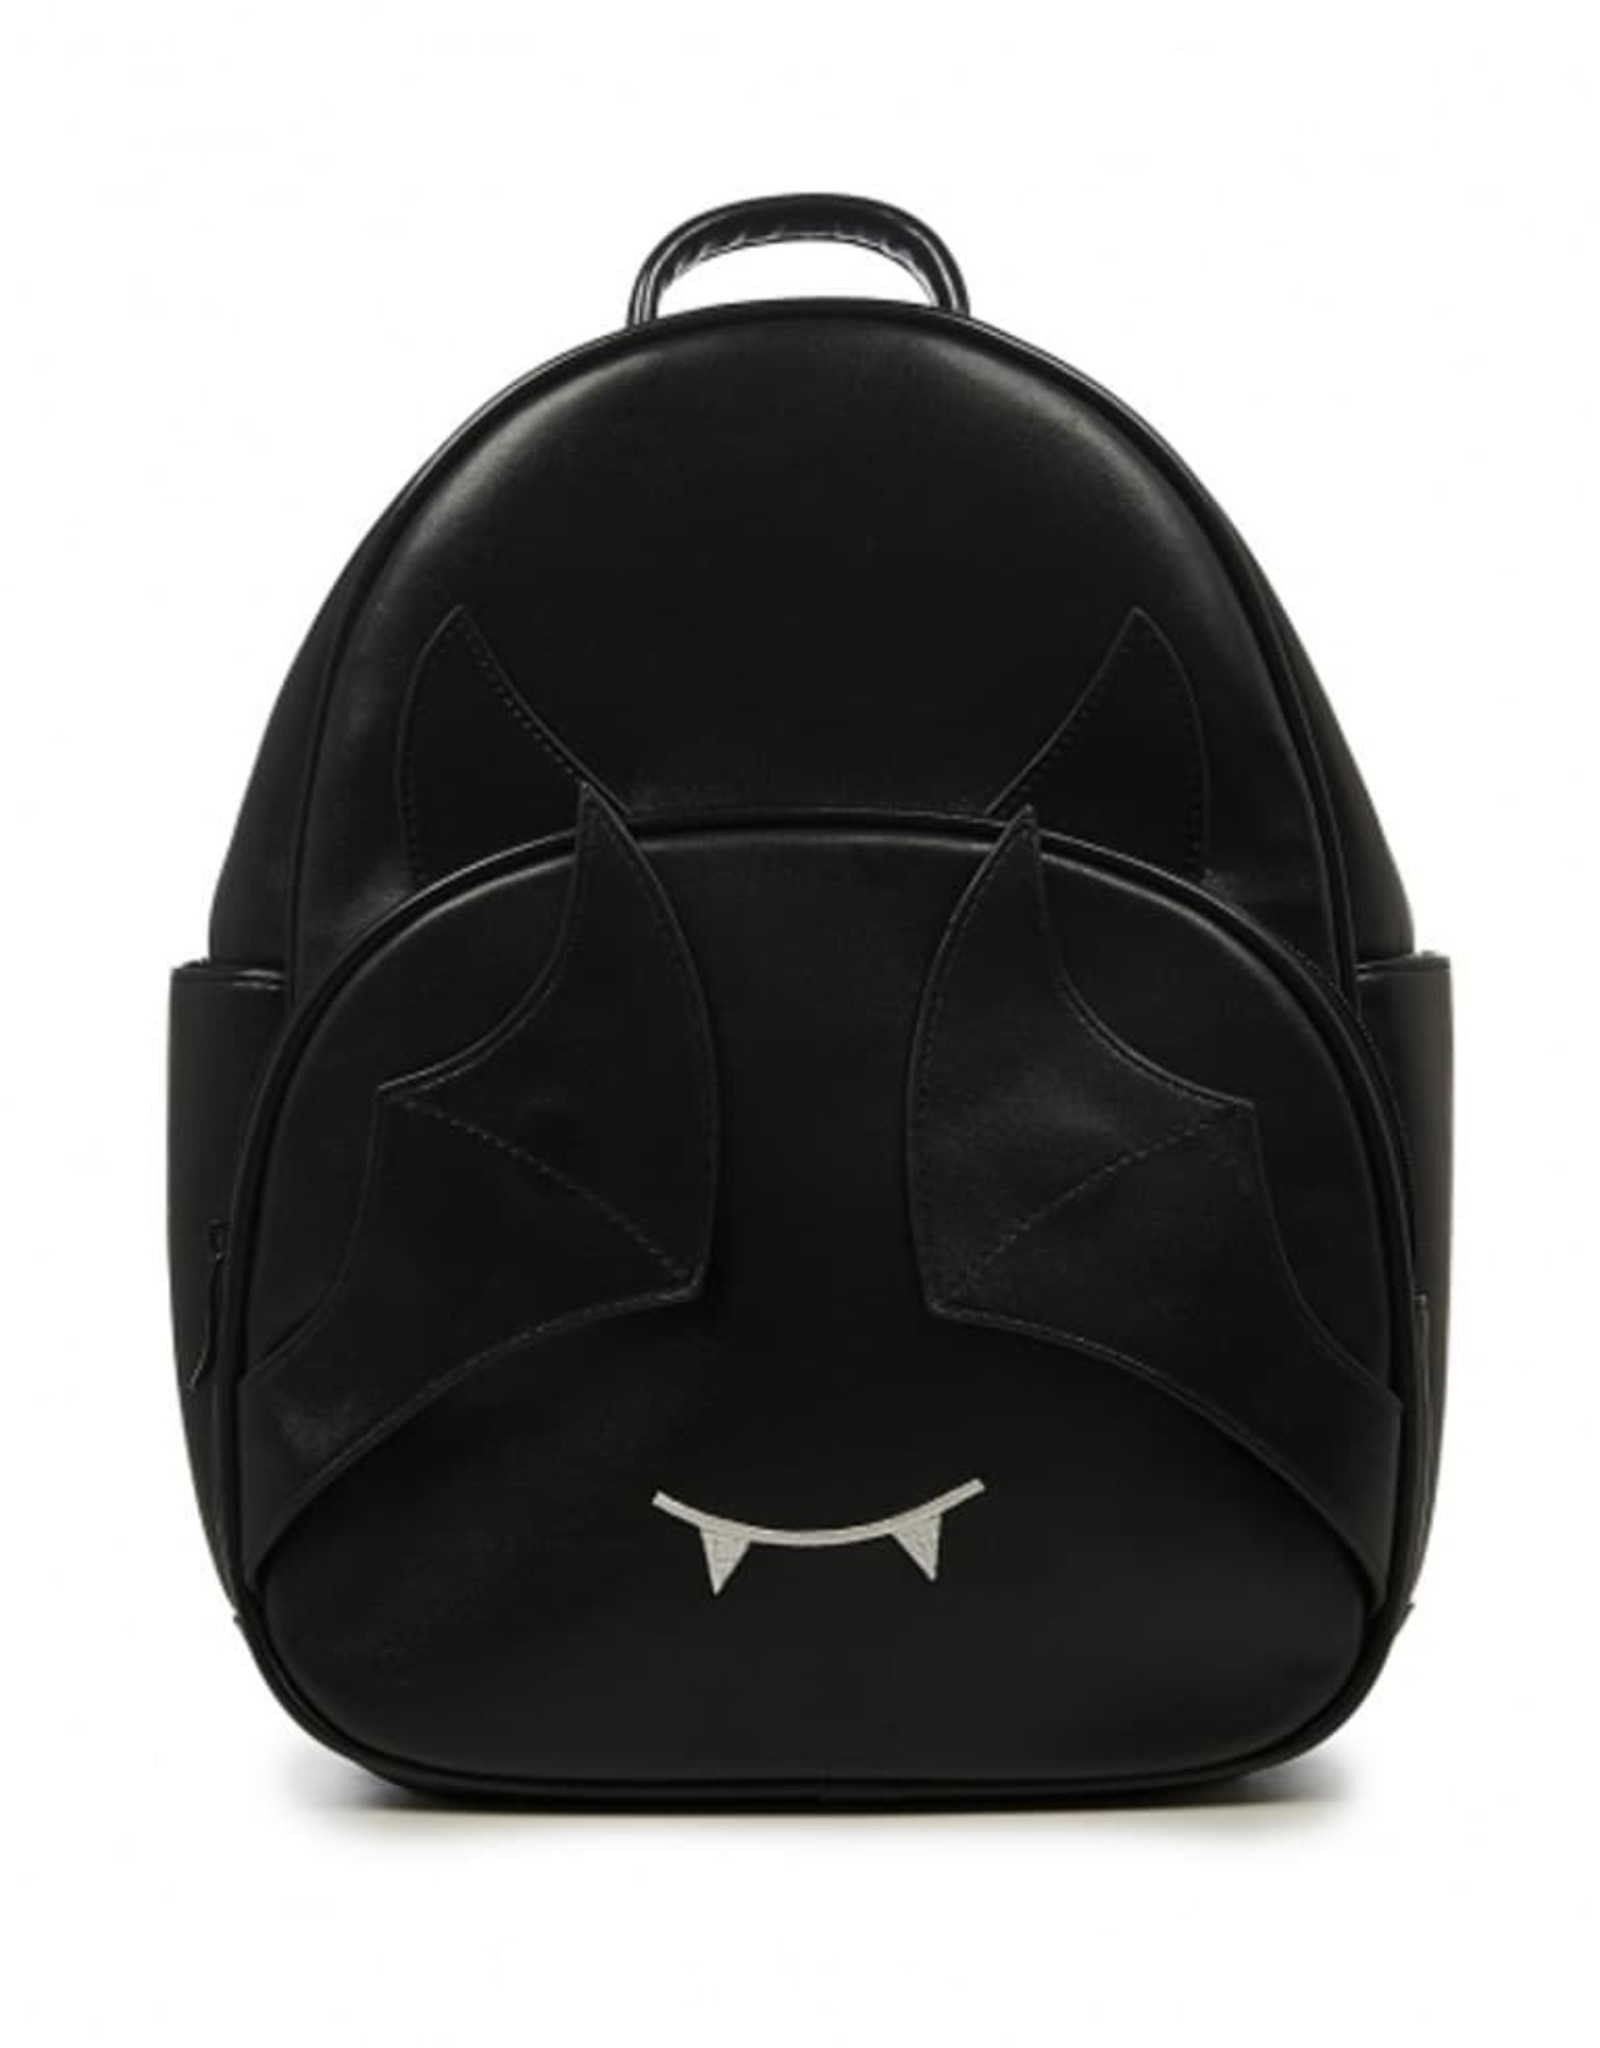 Banned Fantasy bags and wallets - Banned Fantasy backpack Release The Bats